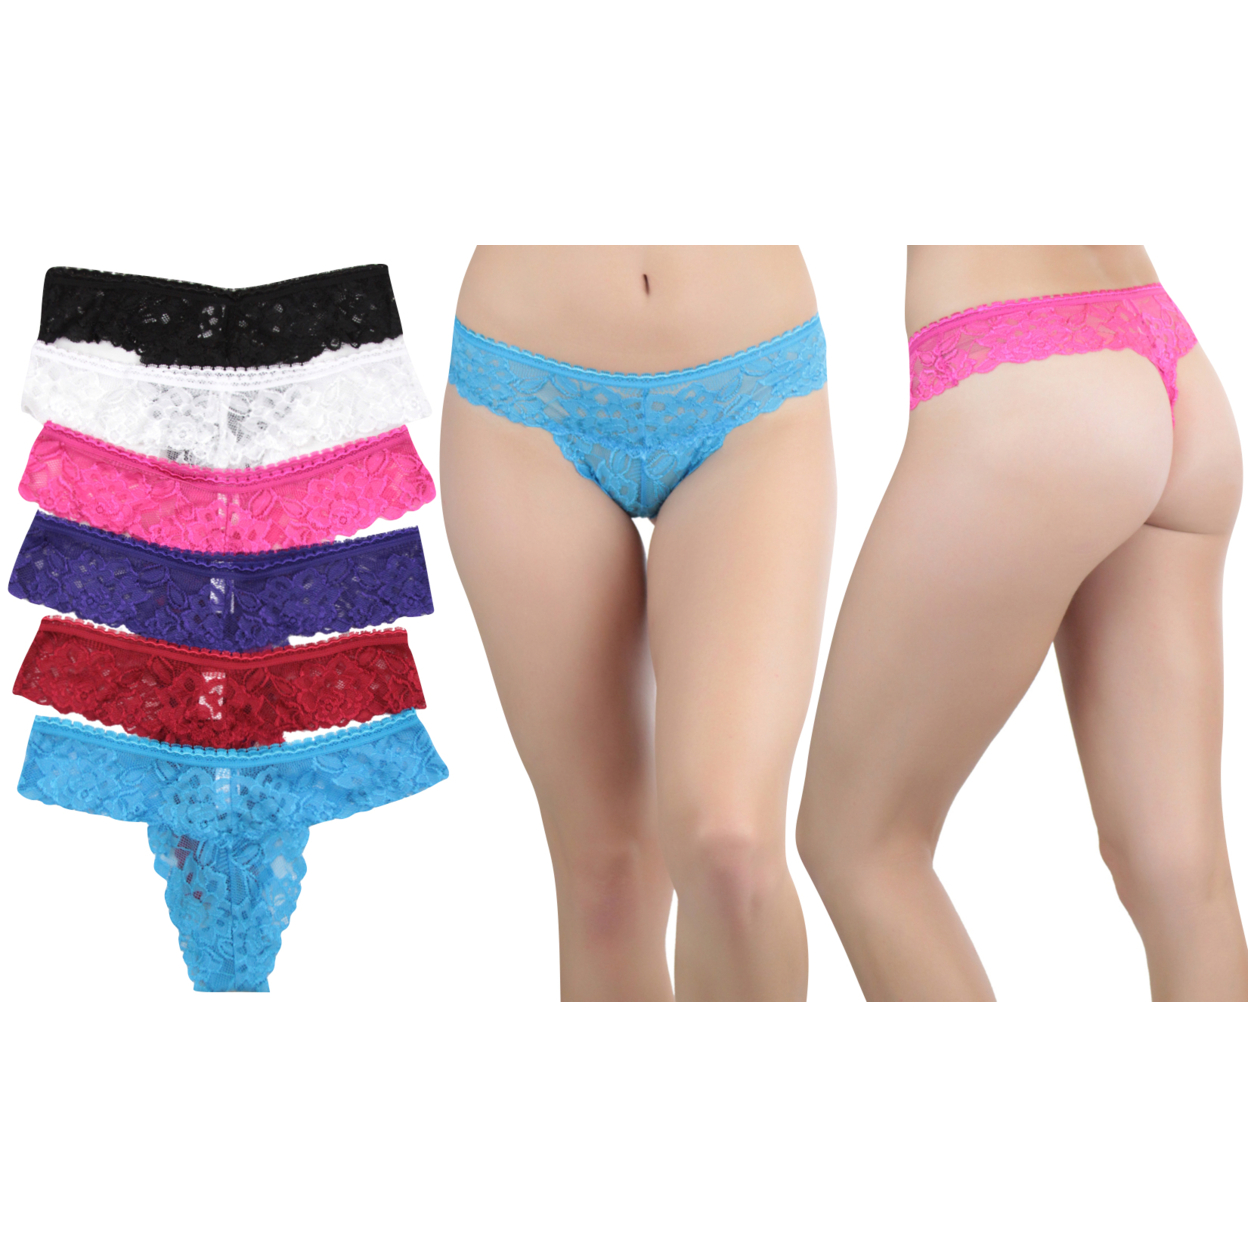 6 Pack Of Women's Low Rise Floral Thongs - XL